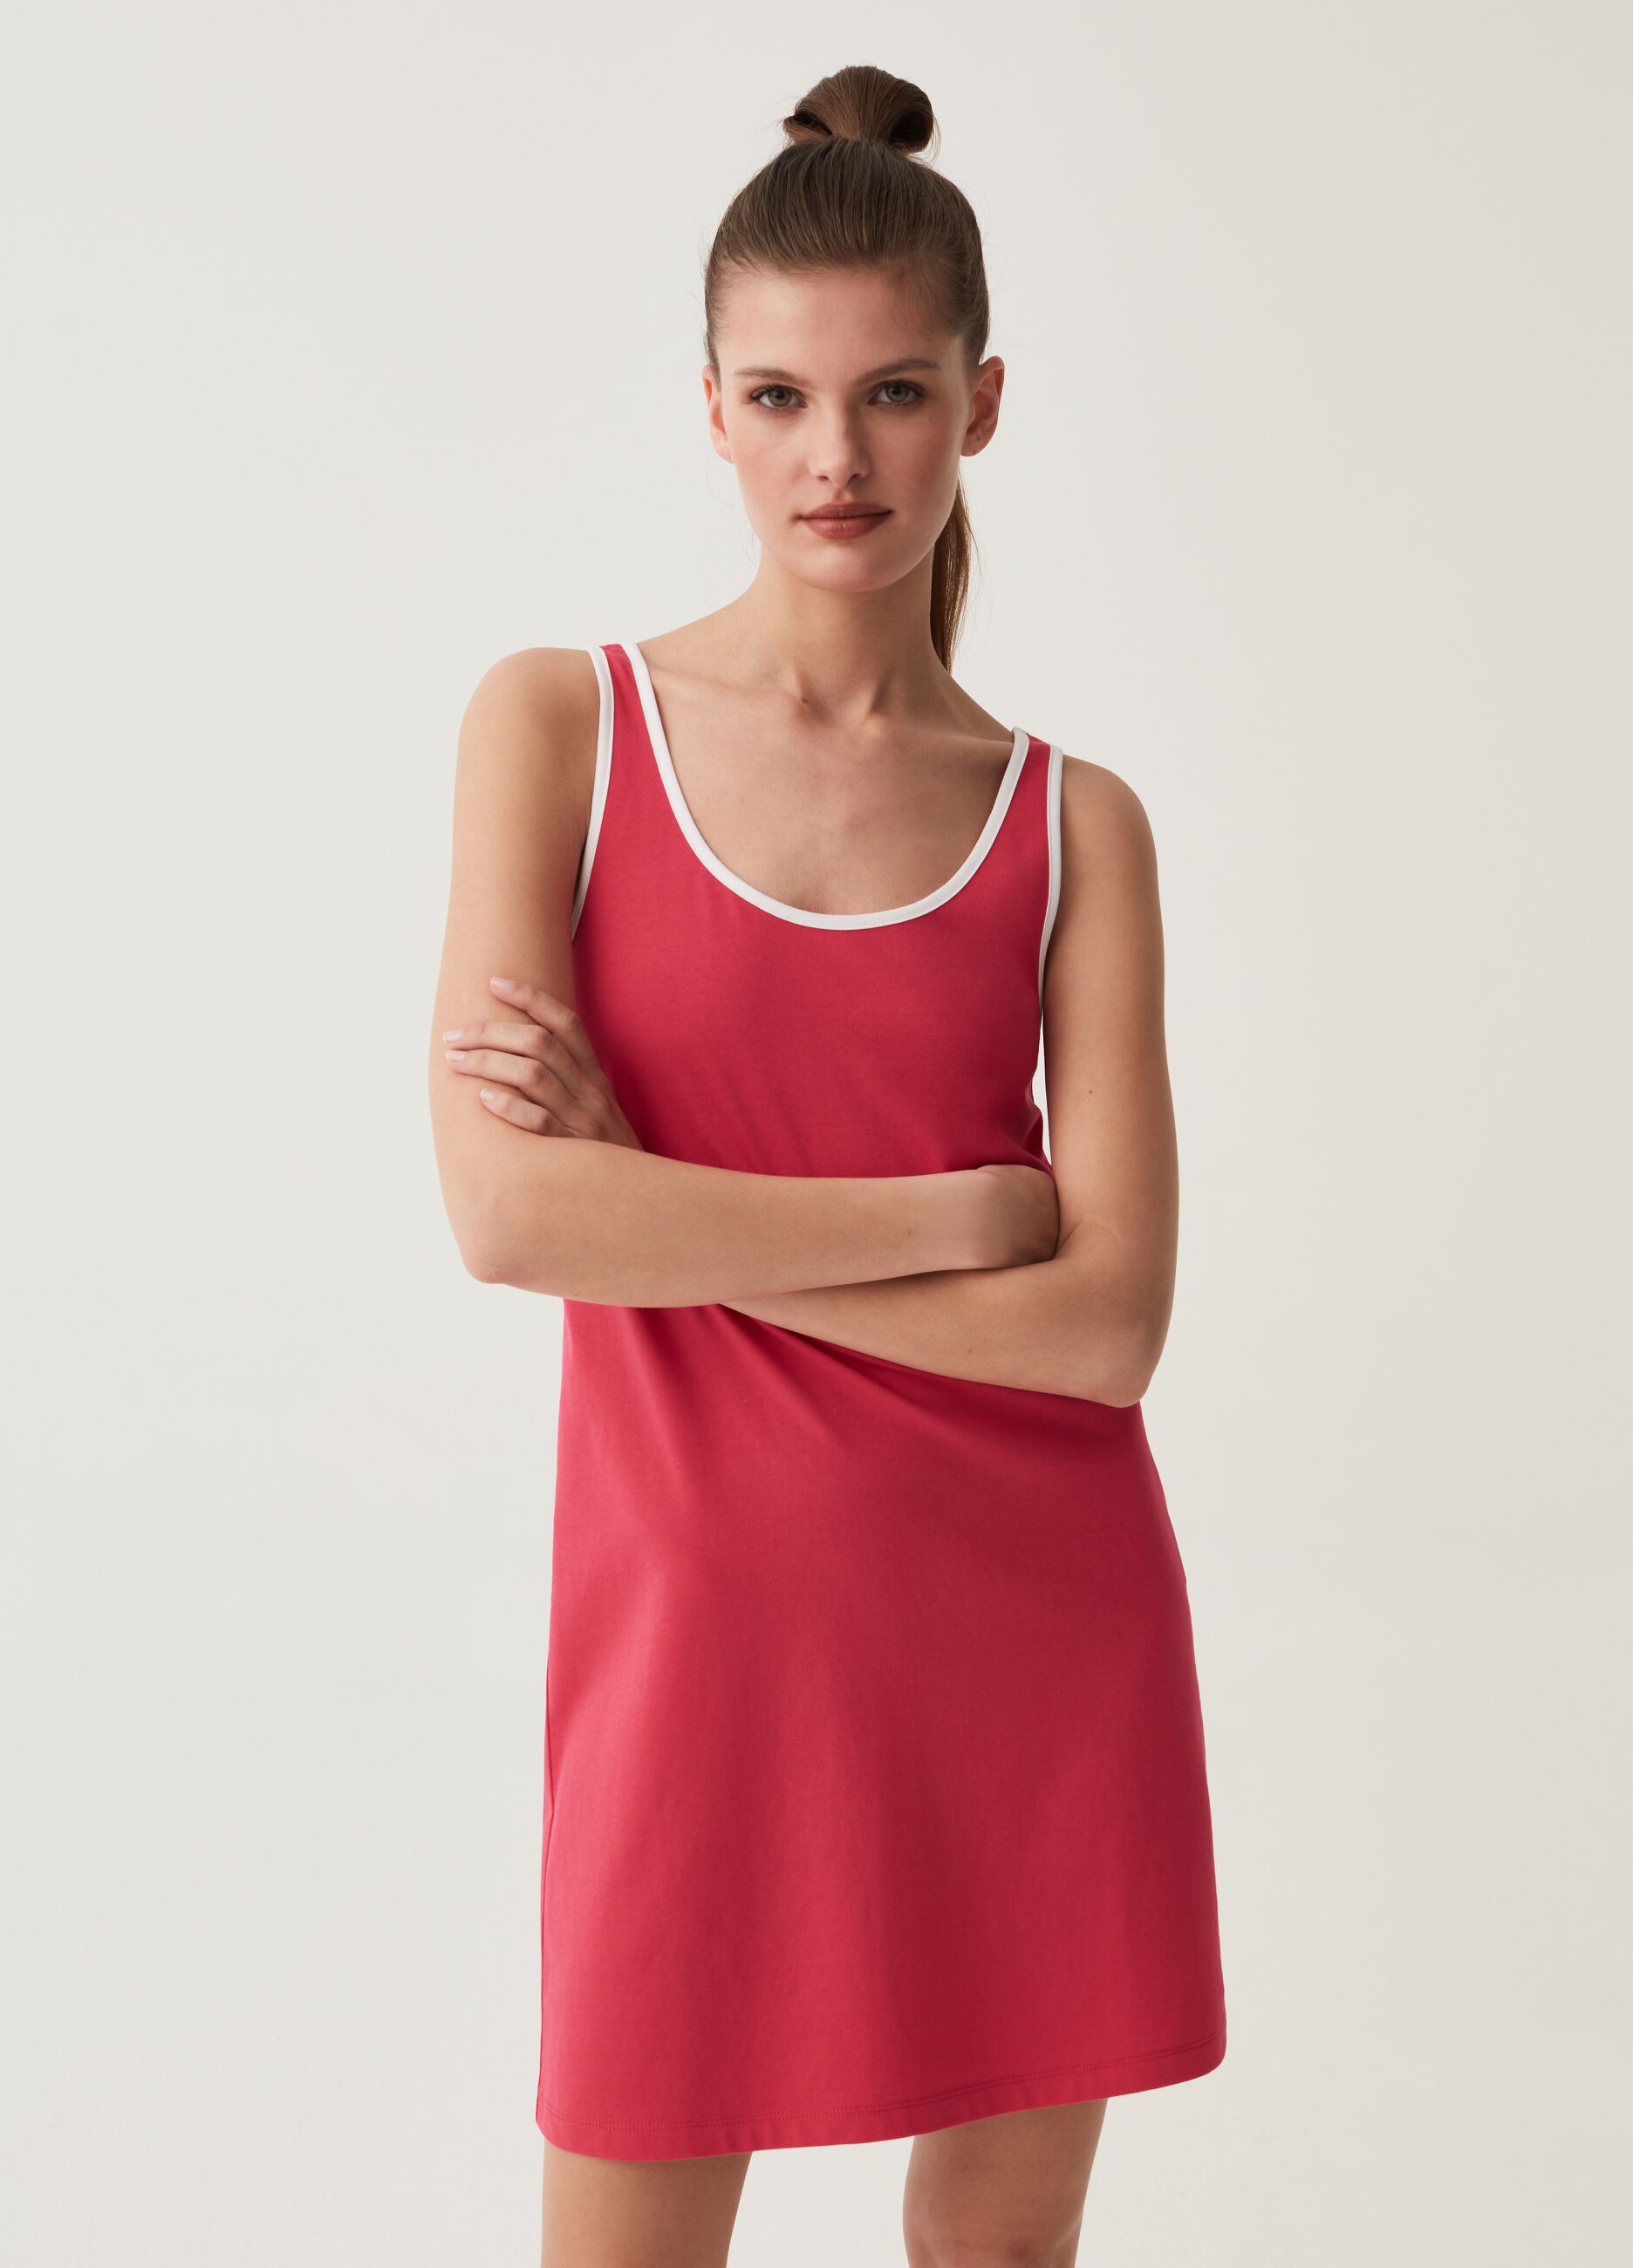 Sleeveless dress with contrasting colour trims